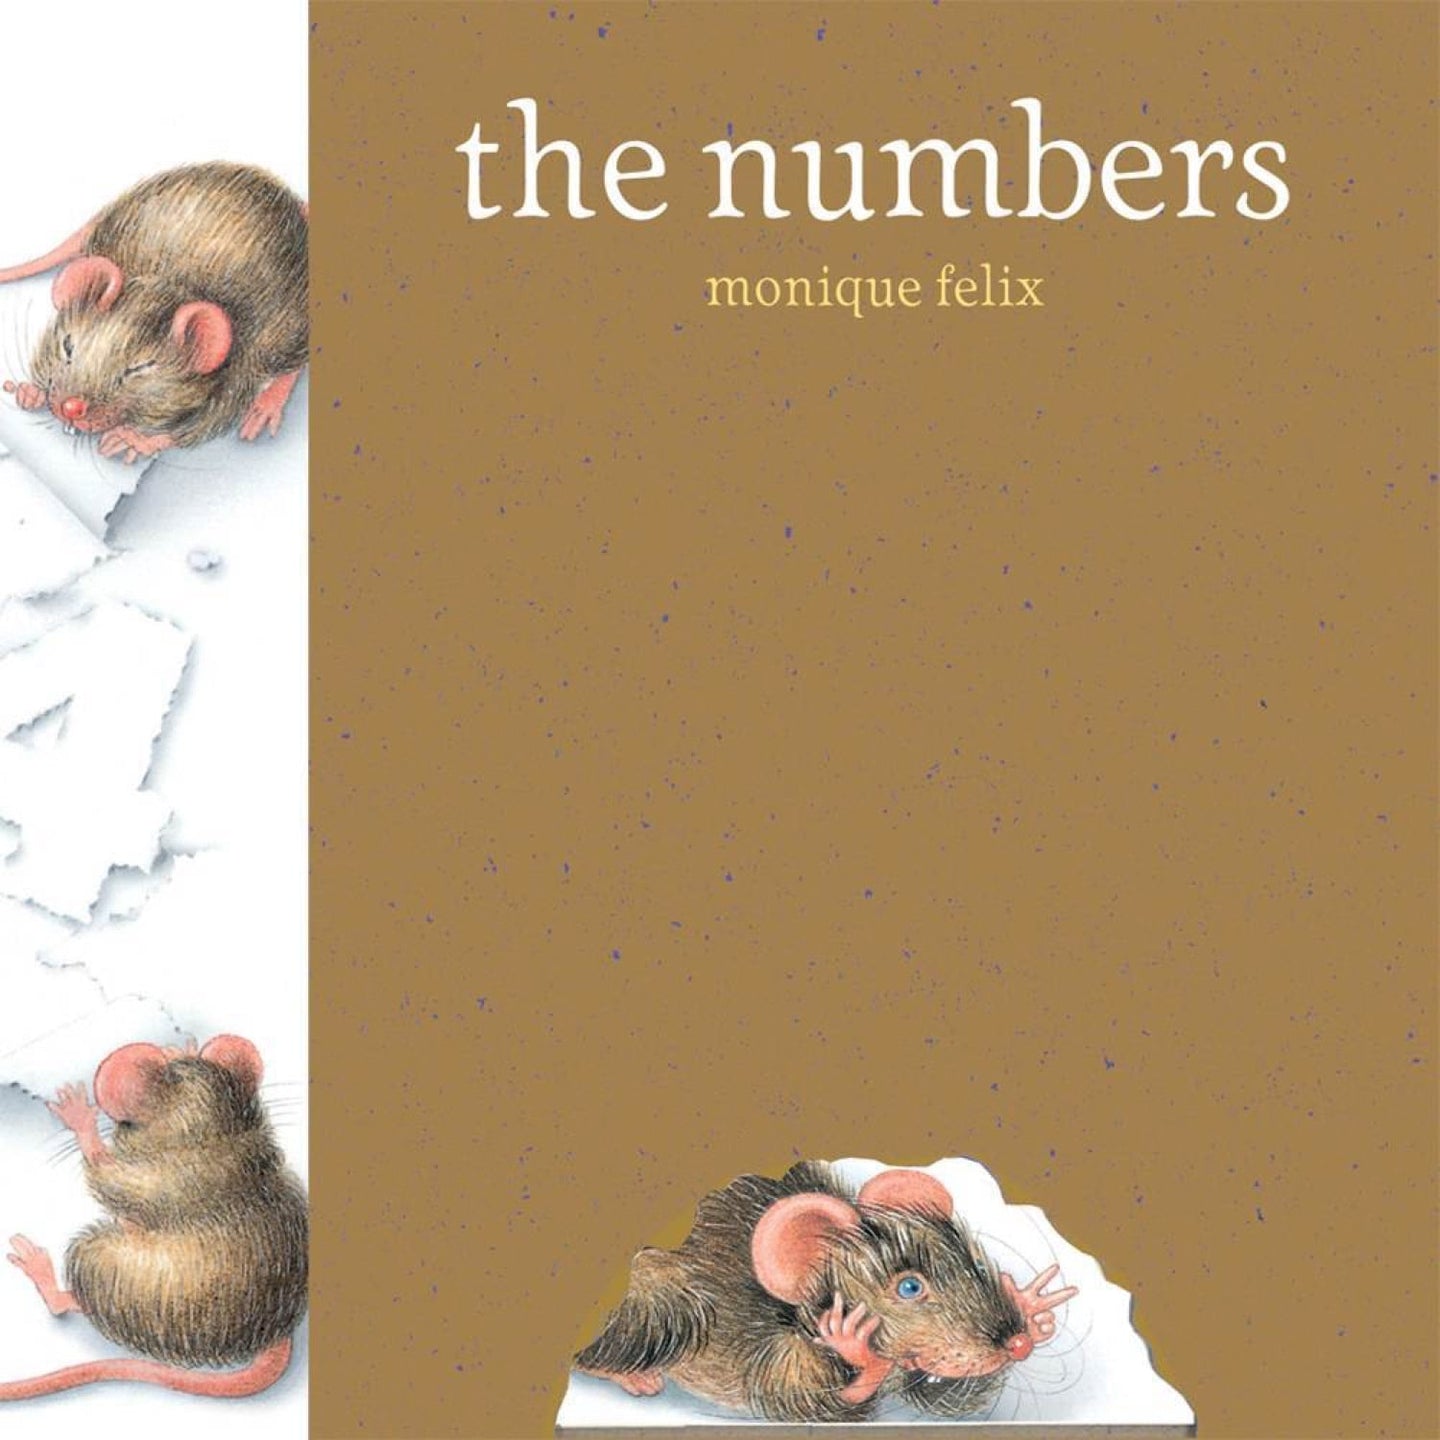 Mouse Books: The Numbers